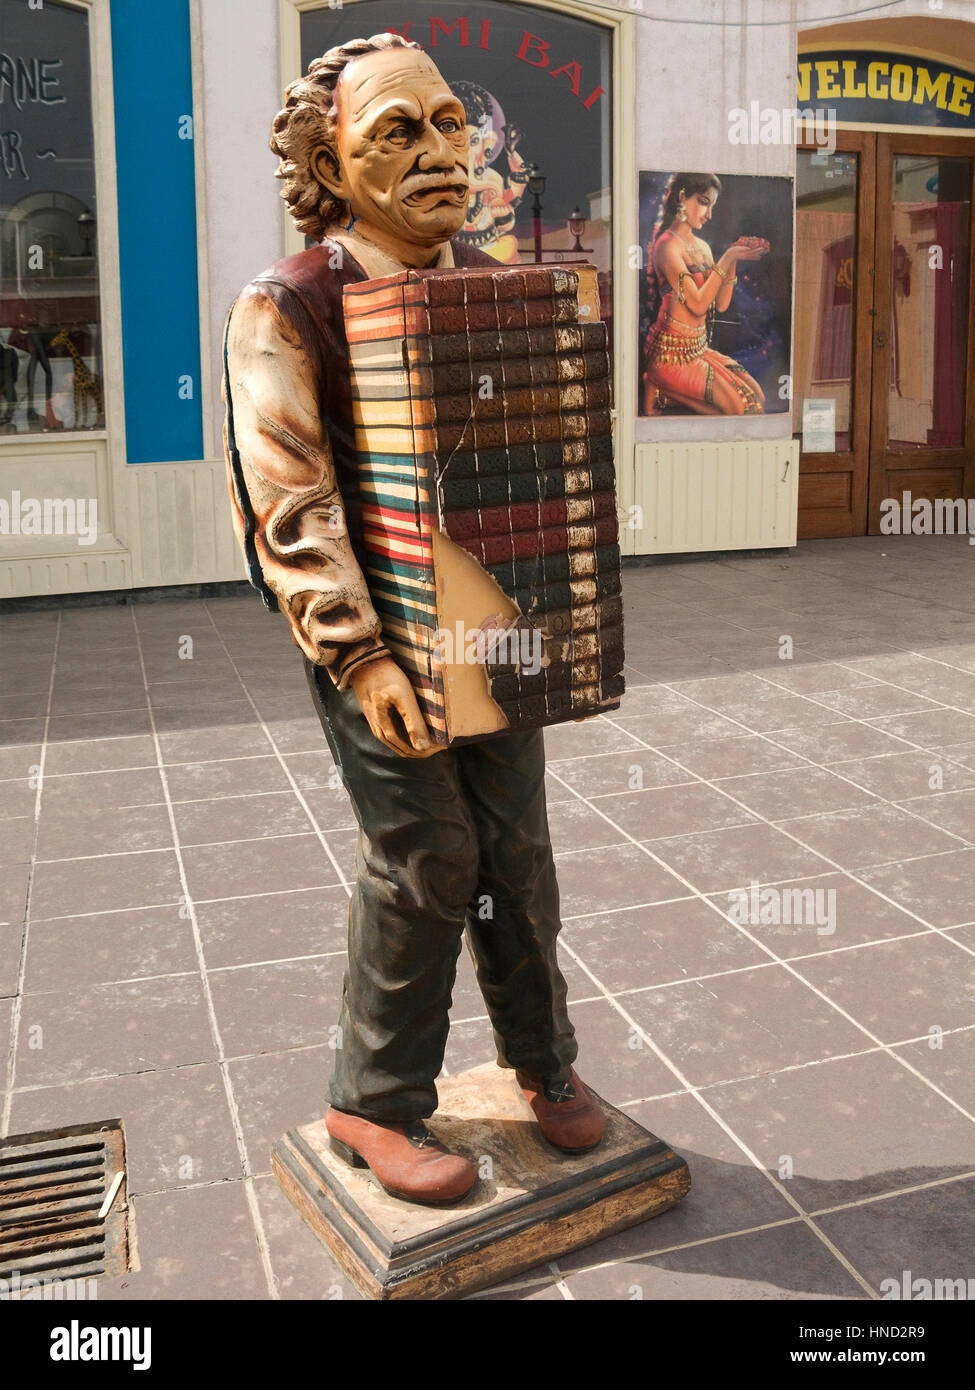 Figure of an old man carrying large stakc of books promoting bookshop. Stock Photo